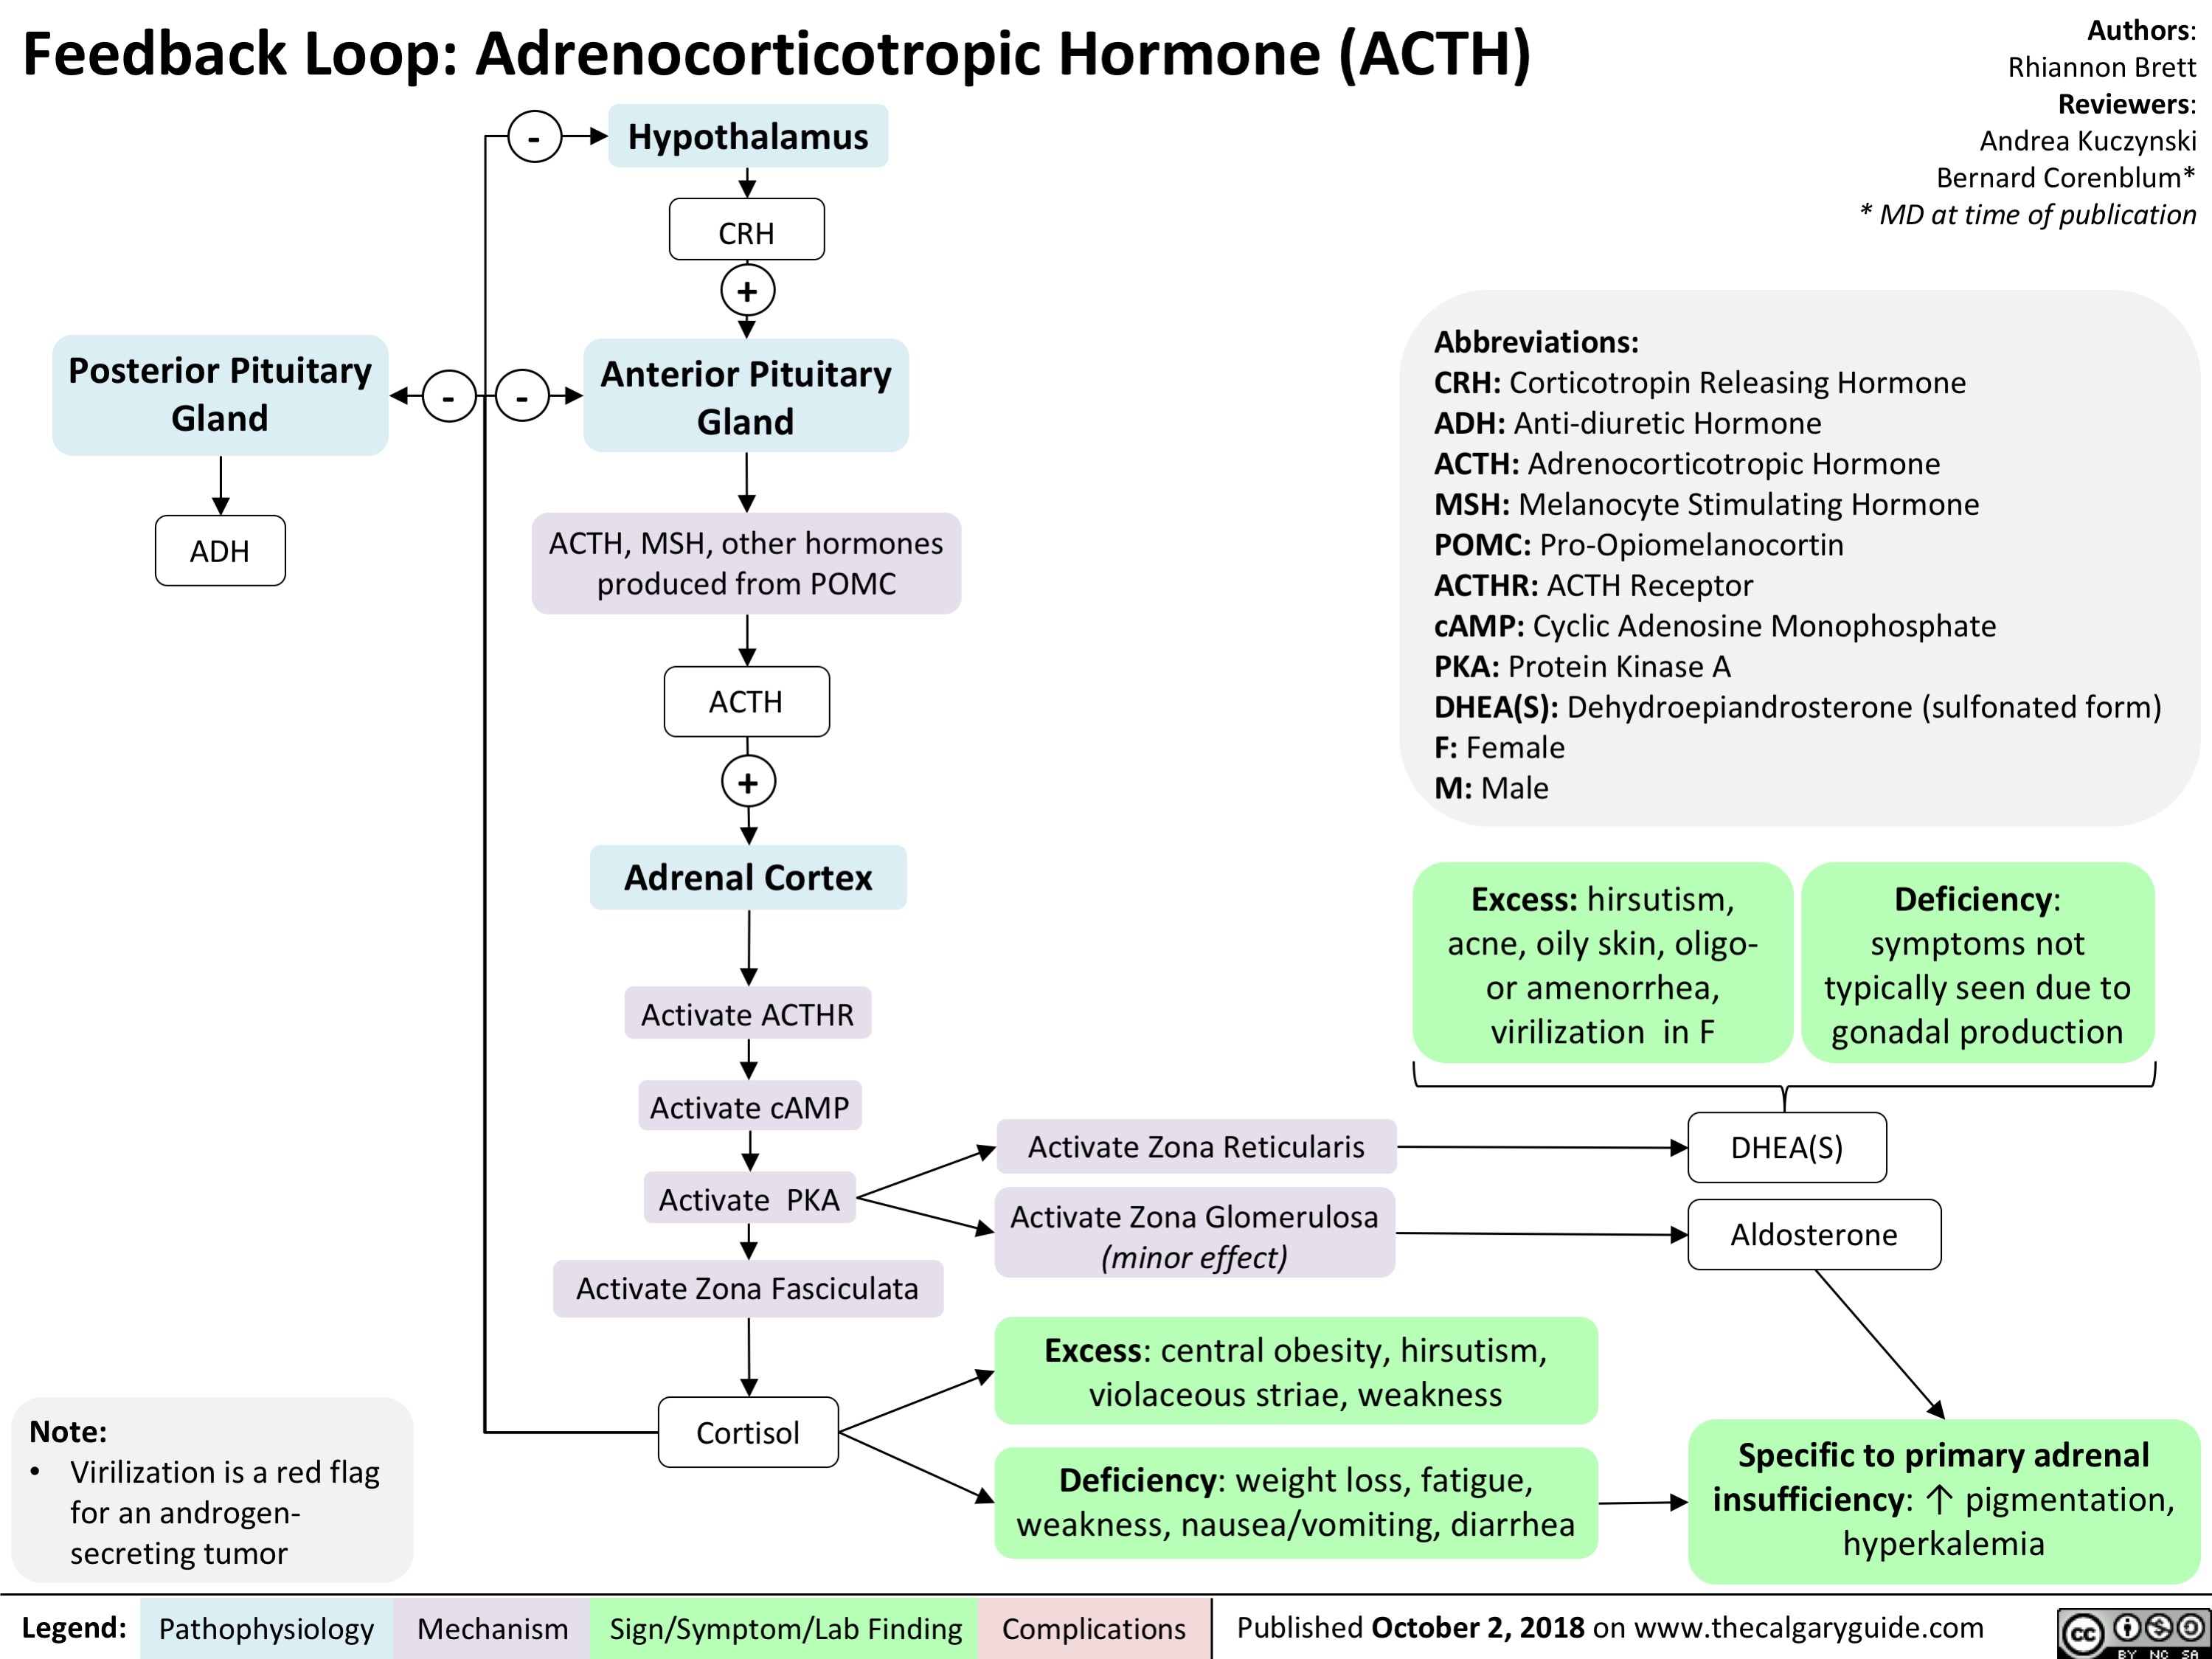 Feedback Loop: Adrenocorticotropic Hormone (ACTH)
Authors: Rhiannon Brett Reviewers: Andrea Kuczynski Bernard Corenblum* * MD at time of publication
          Posterior Pituitary Gland
ADH
-
-
-
Hypothalamus
CRH
+
Anterior Pituitary Gland
ACTH, MSH, other hormones produced from POMC
ACTH
+
Adrenal Cortex
Activate ACTHR
Activate cAMP Activate PKA Activate Zona Fasciculata
Cortisol
Abbreviations:
CRH: Corticotropin Releasing Hormone
ADH: Anti-diuretic Hormone
ACTH: Adrenocorticotropic Hormone
MSH: Melanocyte Stimulating Hormone
POMC: Pro-Opiomelanocortin
ACTHR: ACTH Receptor
cAMP: Cyclic Adenosine Monophosphate
PKA: Protein Kinase A
DHEA(S): Dehydroepiandrosterone (sulfonated form) F: Female
M: Male
              Excess: hirsutism, acne, oily skin, oligo- or amenorrhea, virilization in F
Deficiency: symptoms not typically seen due to gonadal production
                     Note:
Activate Zona Reticularis Activate Zona Glomerulosa
(minor effect)
Excess: central obesity, hirsutism, violaceous striae, weakness
Deficiency: weight loss, fatigue, weakness, nausea/vomiting, diarrhea
DHEA(S) Aldosterone
Specific to primary adrenal insufficiency: ↑ pigmentation, hyperkalemia
   • Virilization is a red flag for an androgen- secreting tumor
  Legend:
 Pathophysiology
 Mechanism
Sign/Symptom/Lab Finding
  Complications
Published October 2, 2018 on www.thecalgaryguide.com
   